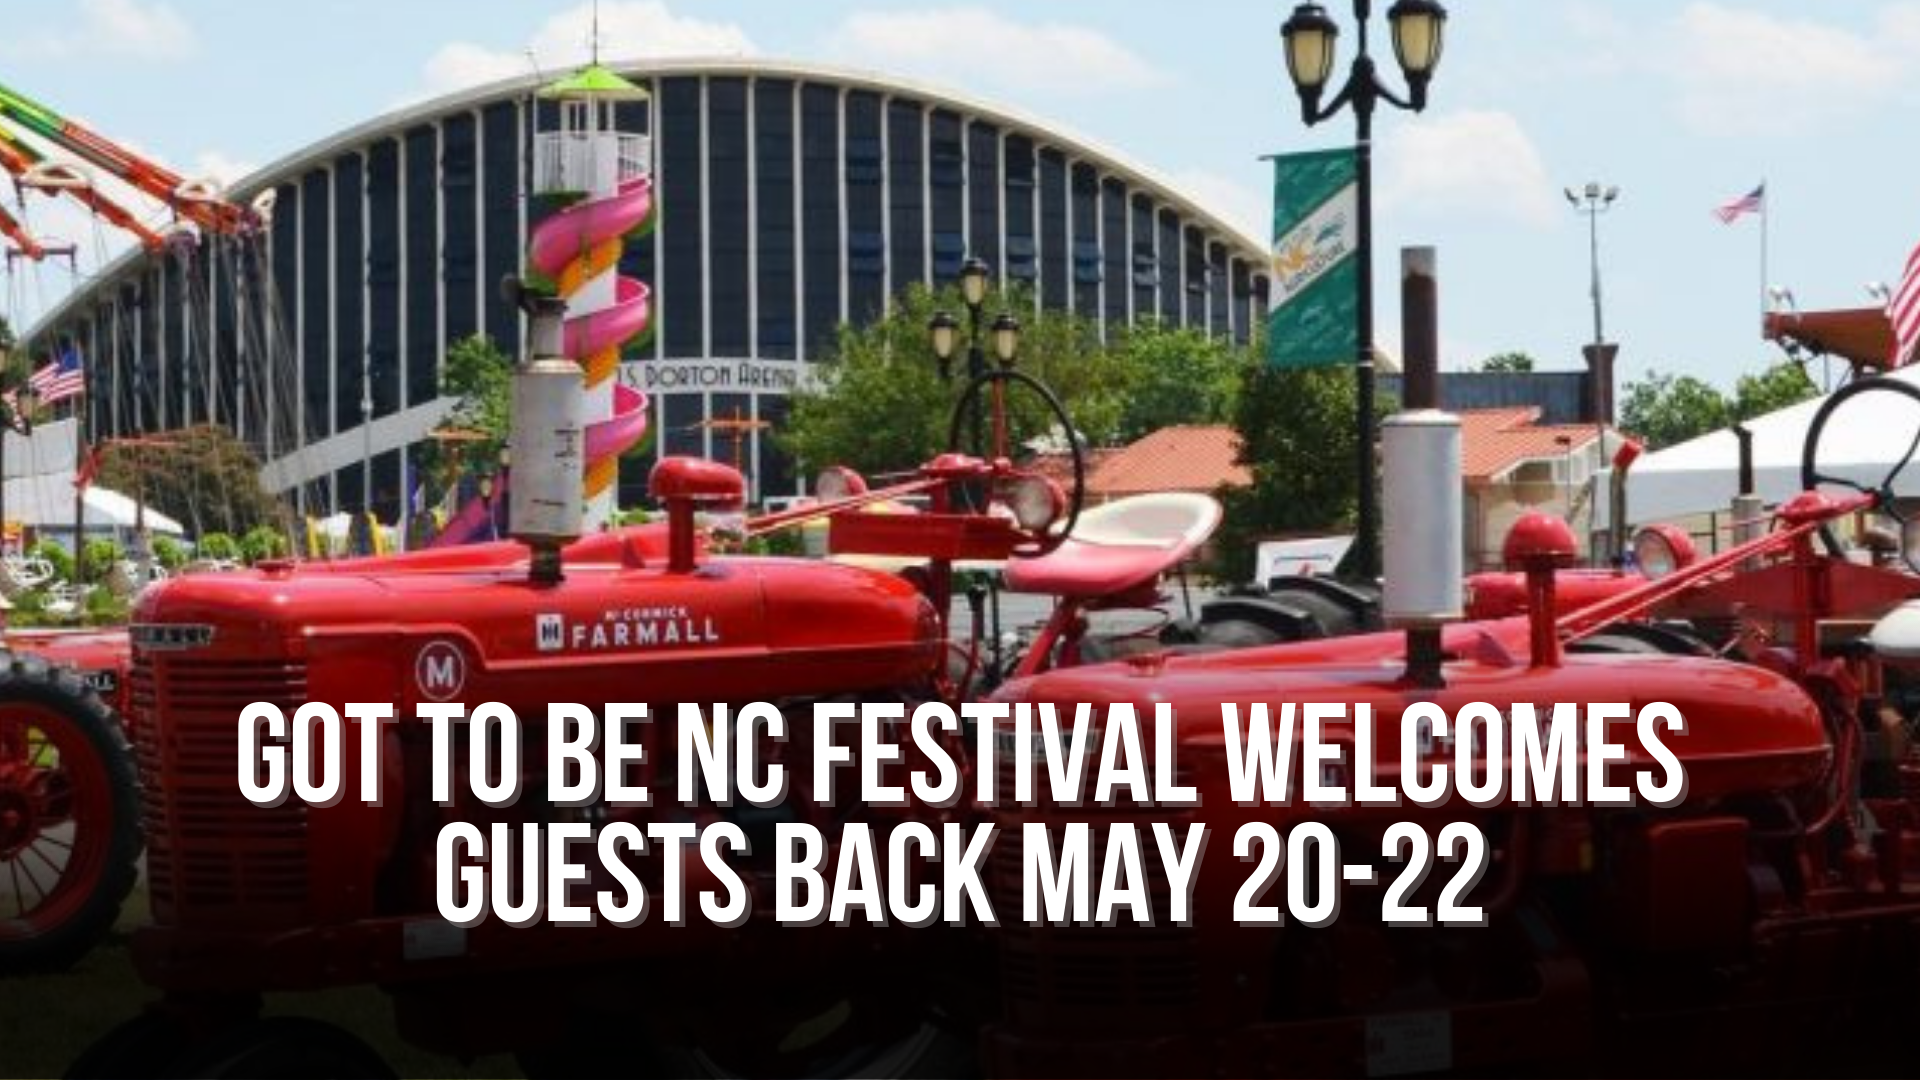 Got to Be NC Festival guests back May 2022 — Neuse News